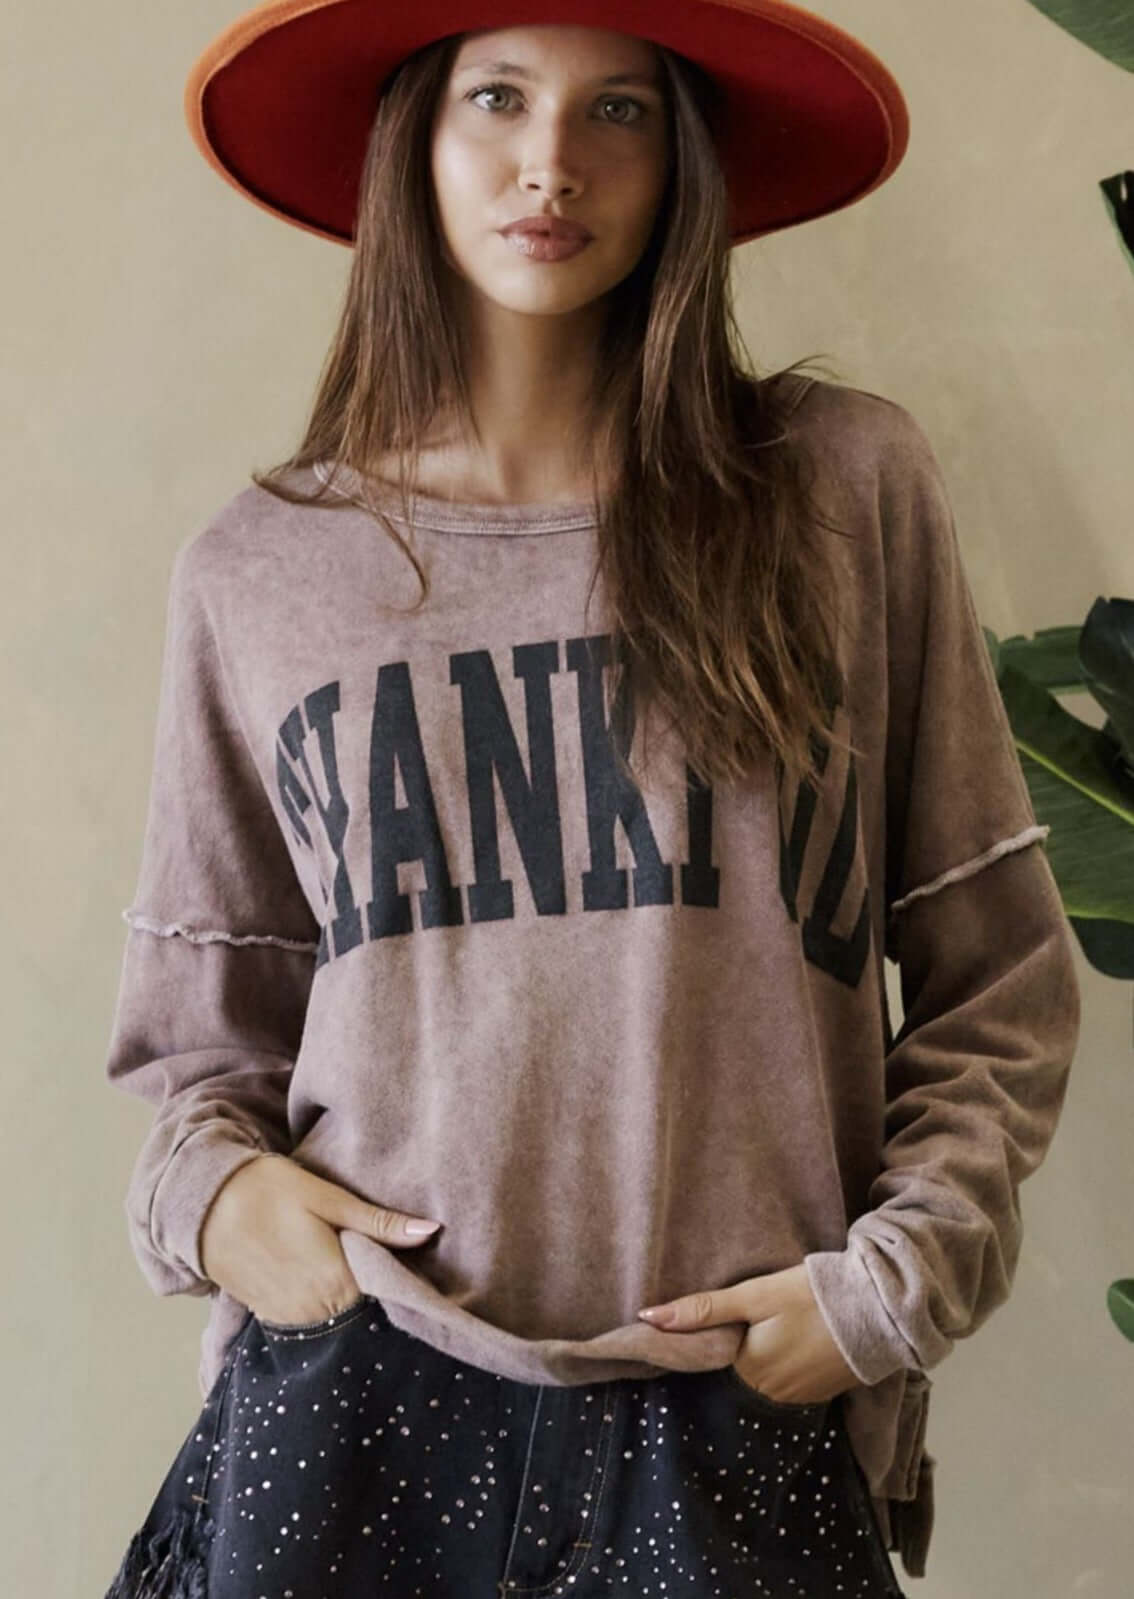 Made in USA Women's Oversized Graphic Garment Washed Vintage Look Sweatshirt with "Thankful" Graphic Lettering and Raw seam detail in Coffee Brown | Classy Cozy Cool Women's Made in America Boutique